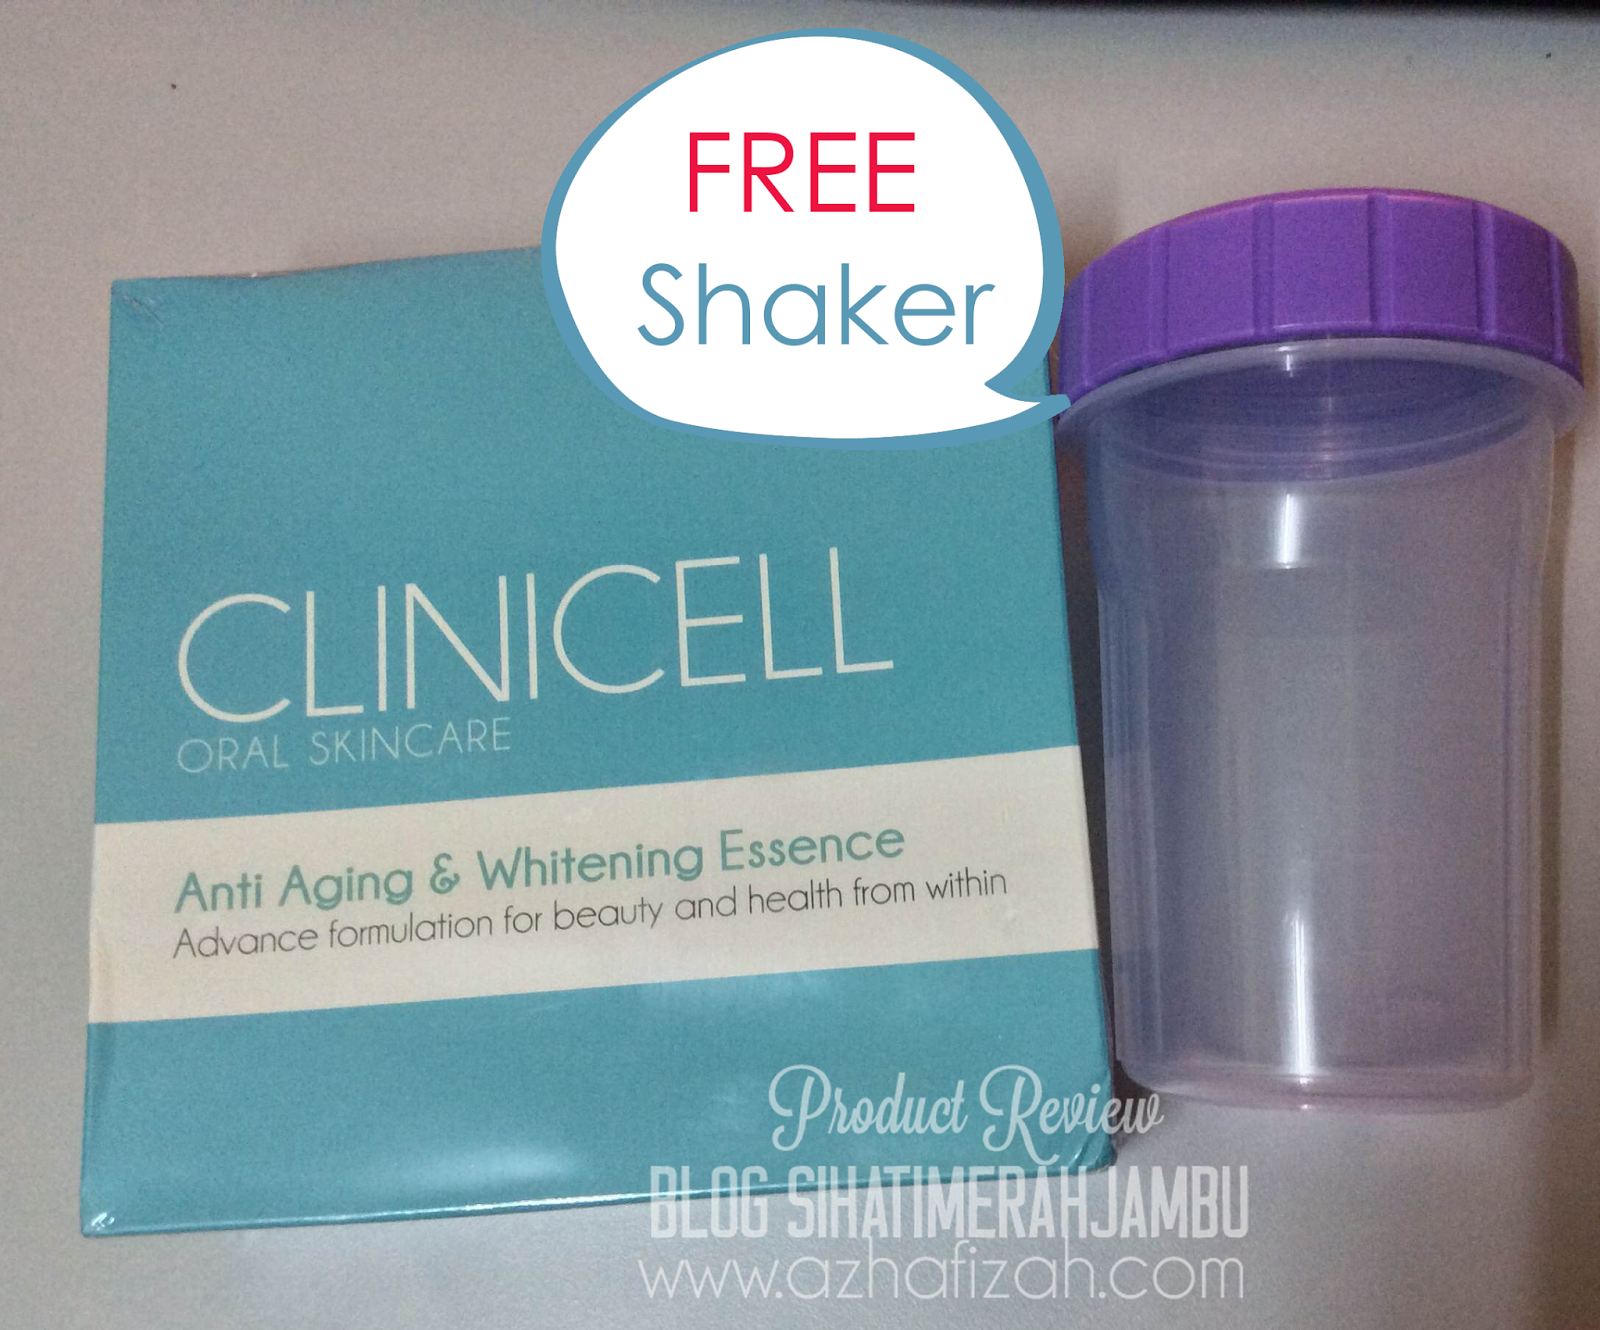 Free shaker clinicell